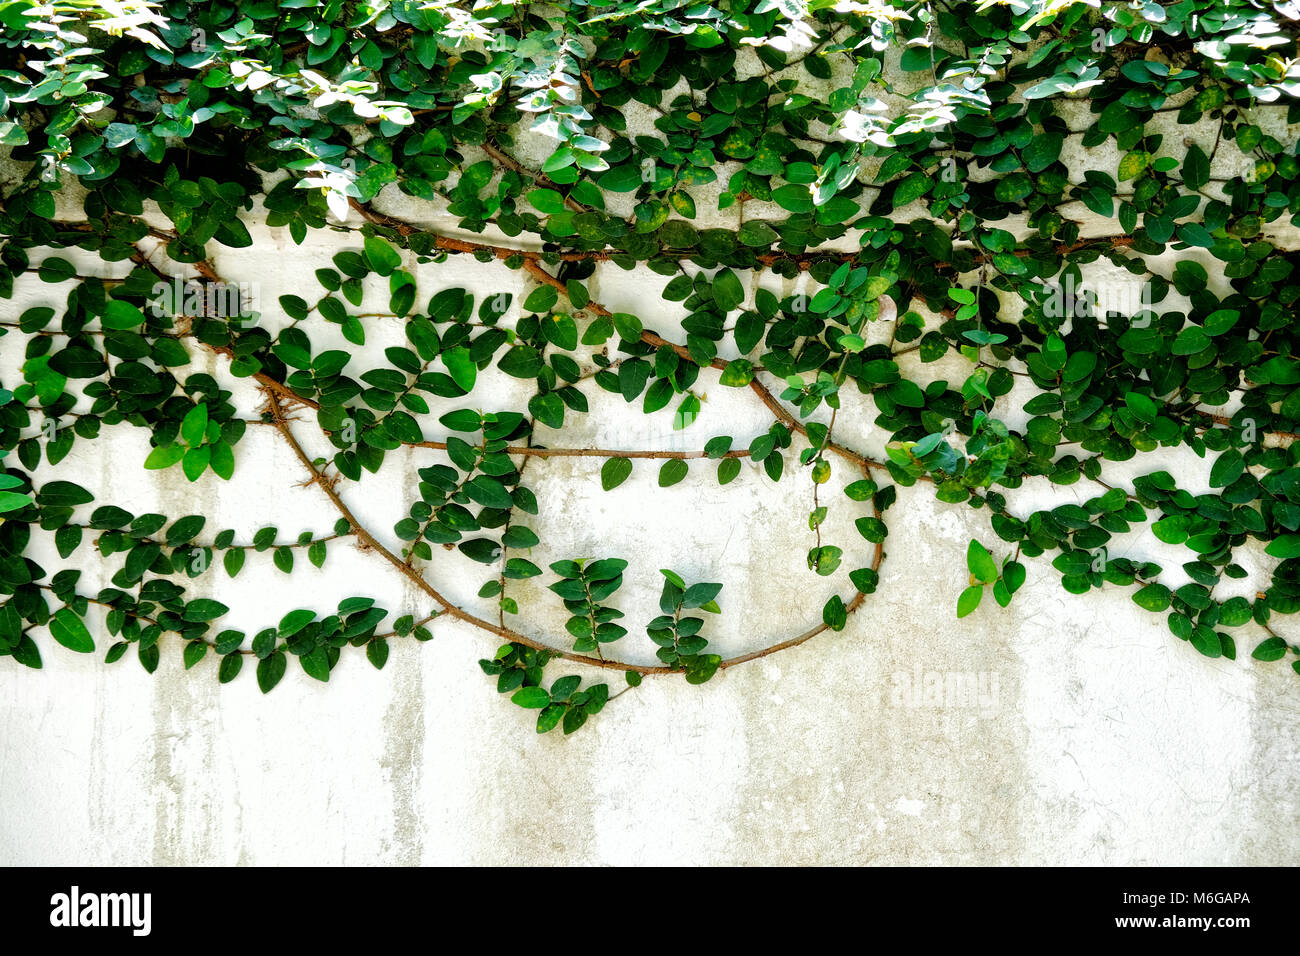 Green vine or creeping plant on the white concrete wall Stock Photo